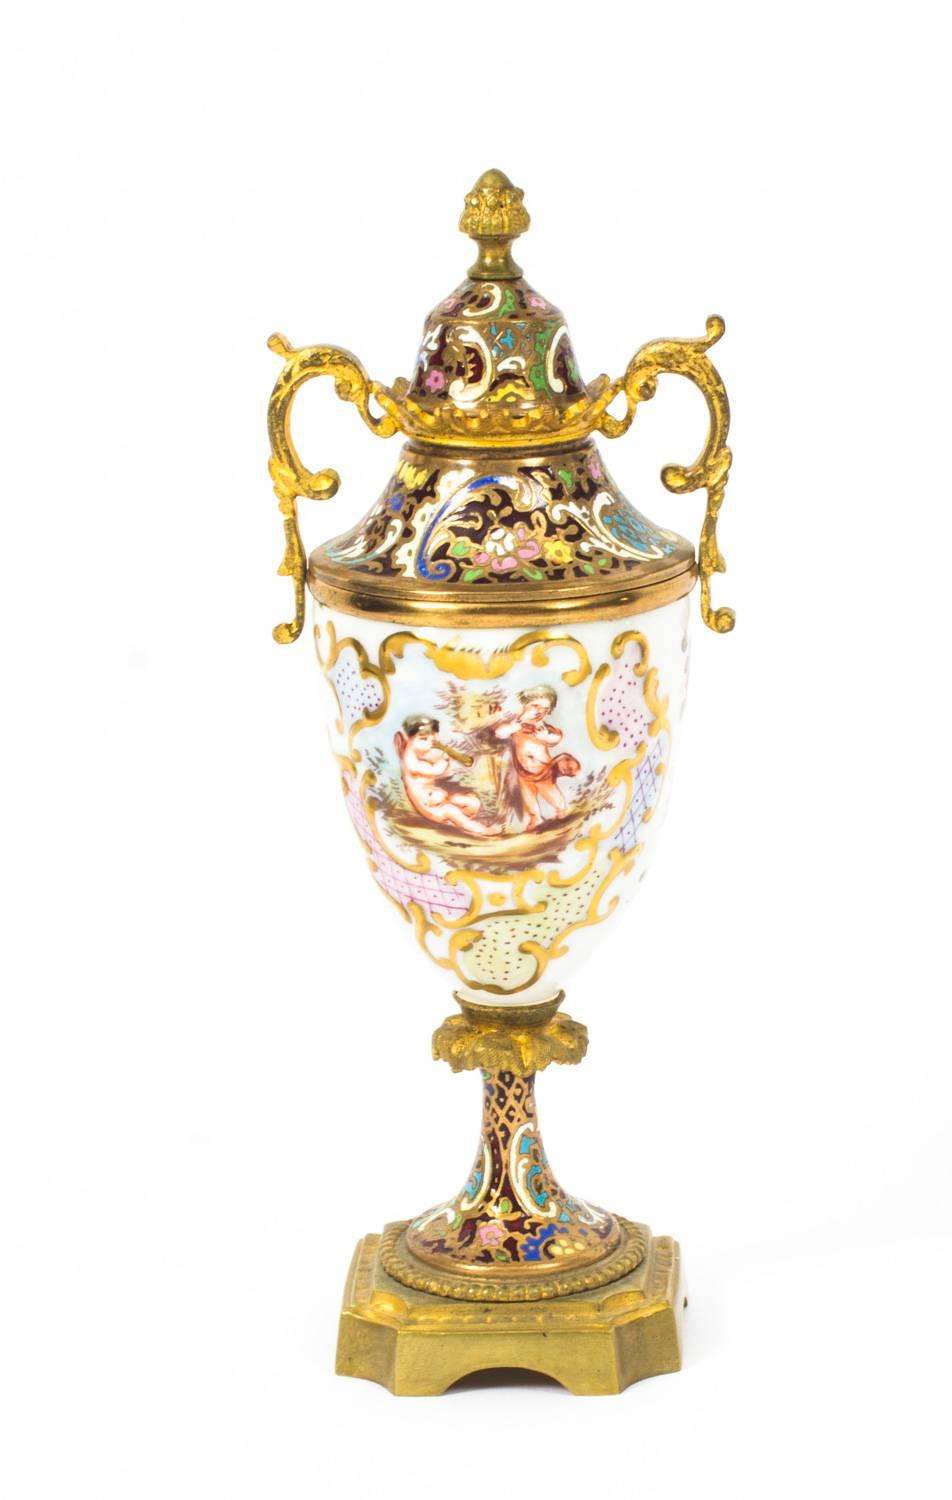 This is a beautiful antique pair of Italian Capodimonte porcelain lidded urns with French ormolu mounts and champleve enamel detailings, Circa 1880 in date.

They are superbly decorated in the Capodimonte manner with hand painted moulded and